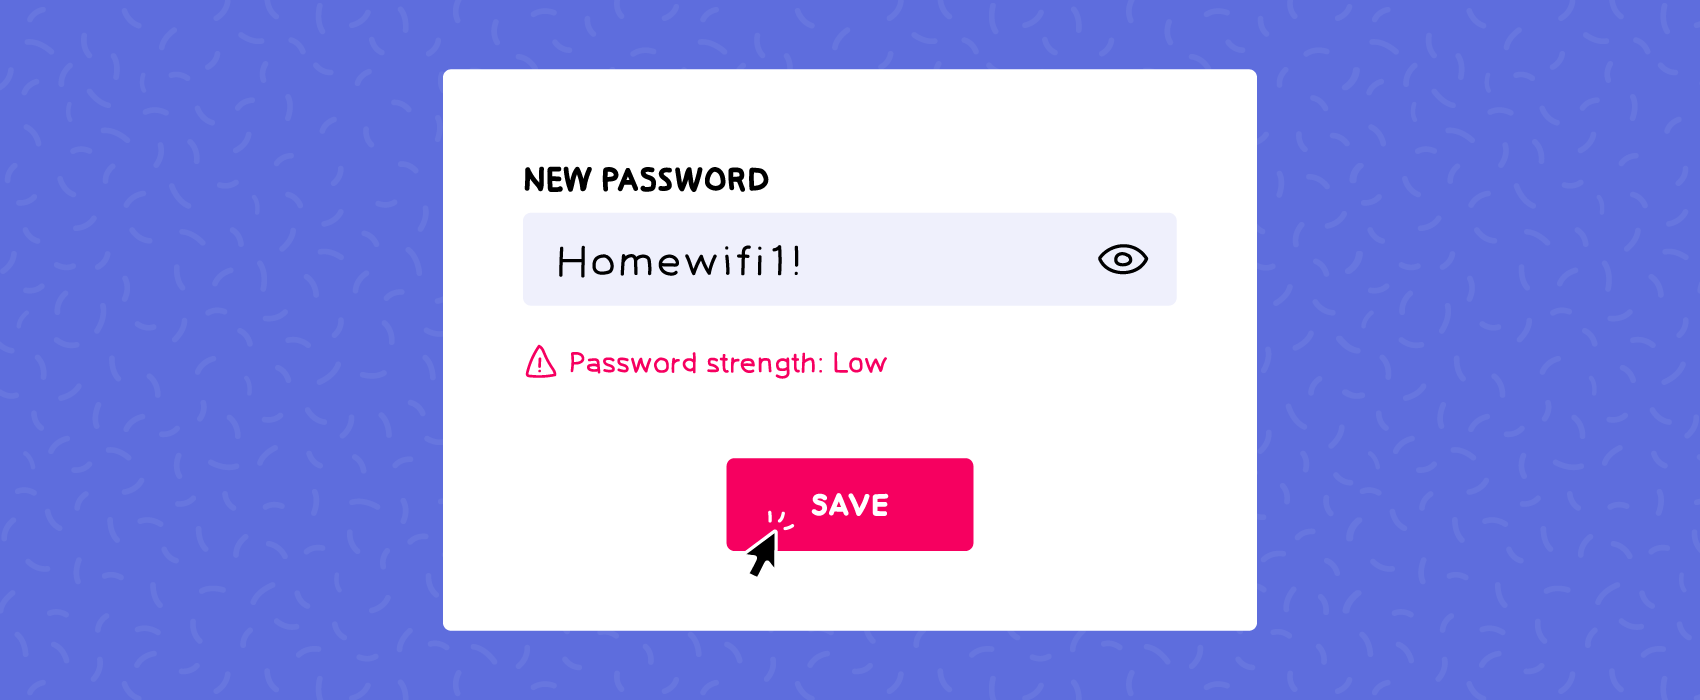 Graphic displaying a new password being flagged as low strength.